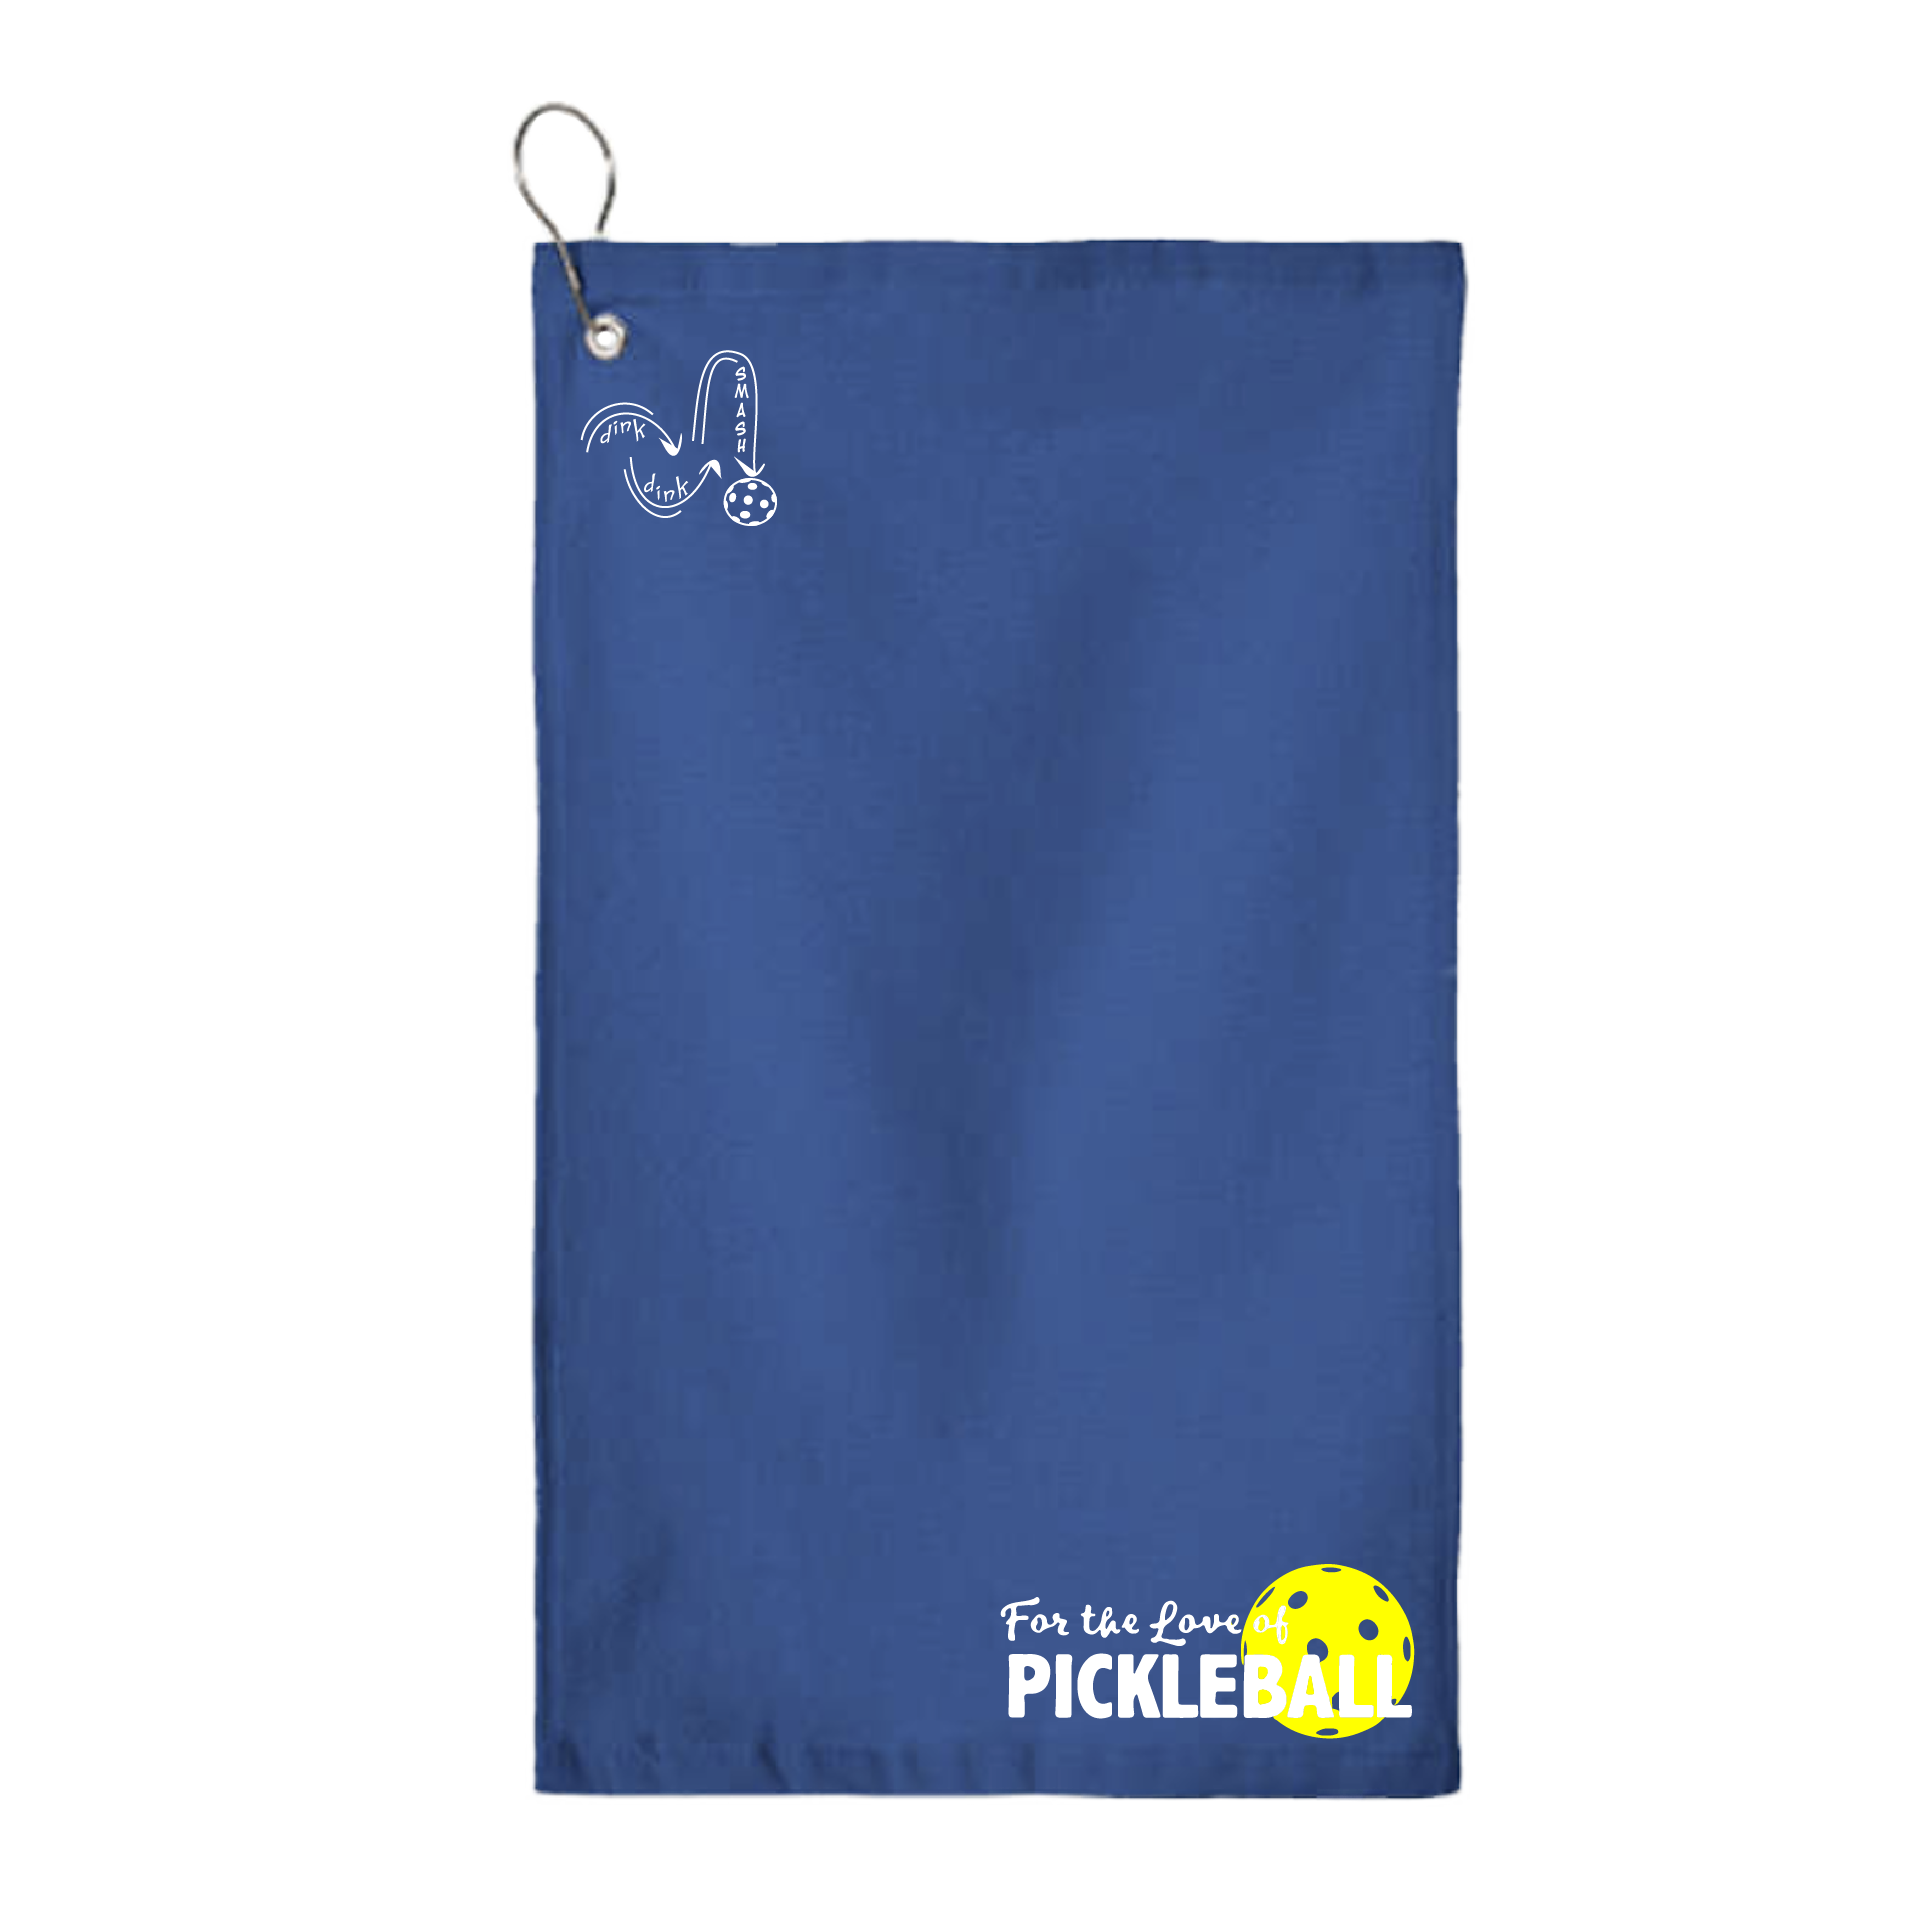 This For the Love of Pickleball towel is crafted with cotton terry velour for optimal performance. It features grommets, hooks, and hemmed edges for added durability. It's perfect for completing your pickleball gear, and an ideal gift for friends and tournaments. The towel is designed to be both absorbent and lightweight, so you can remain dry and comfortable while you play. 